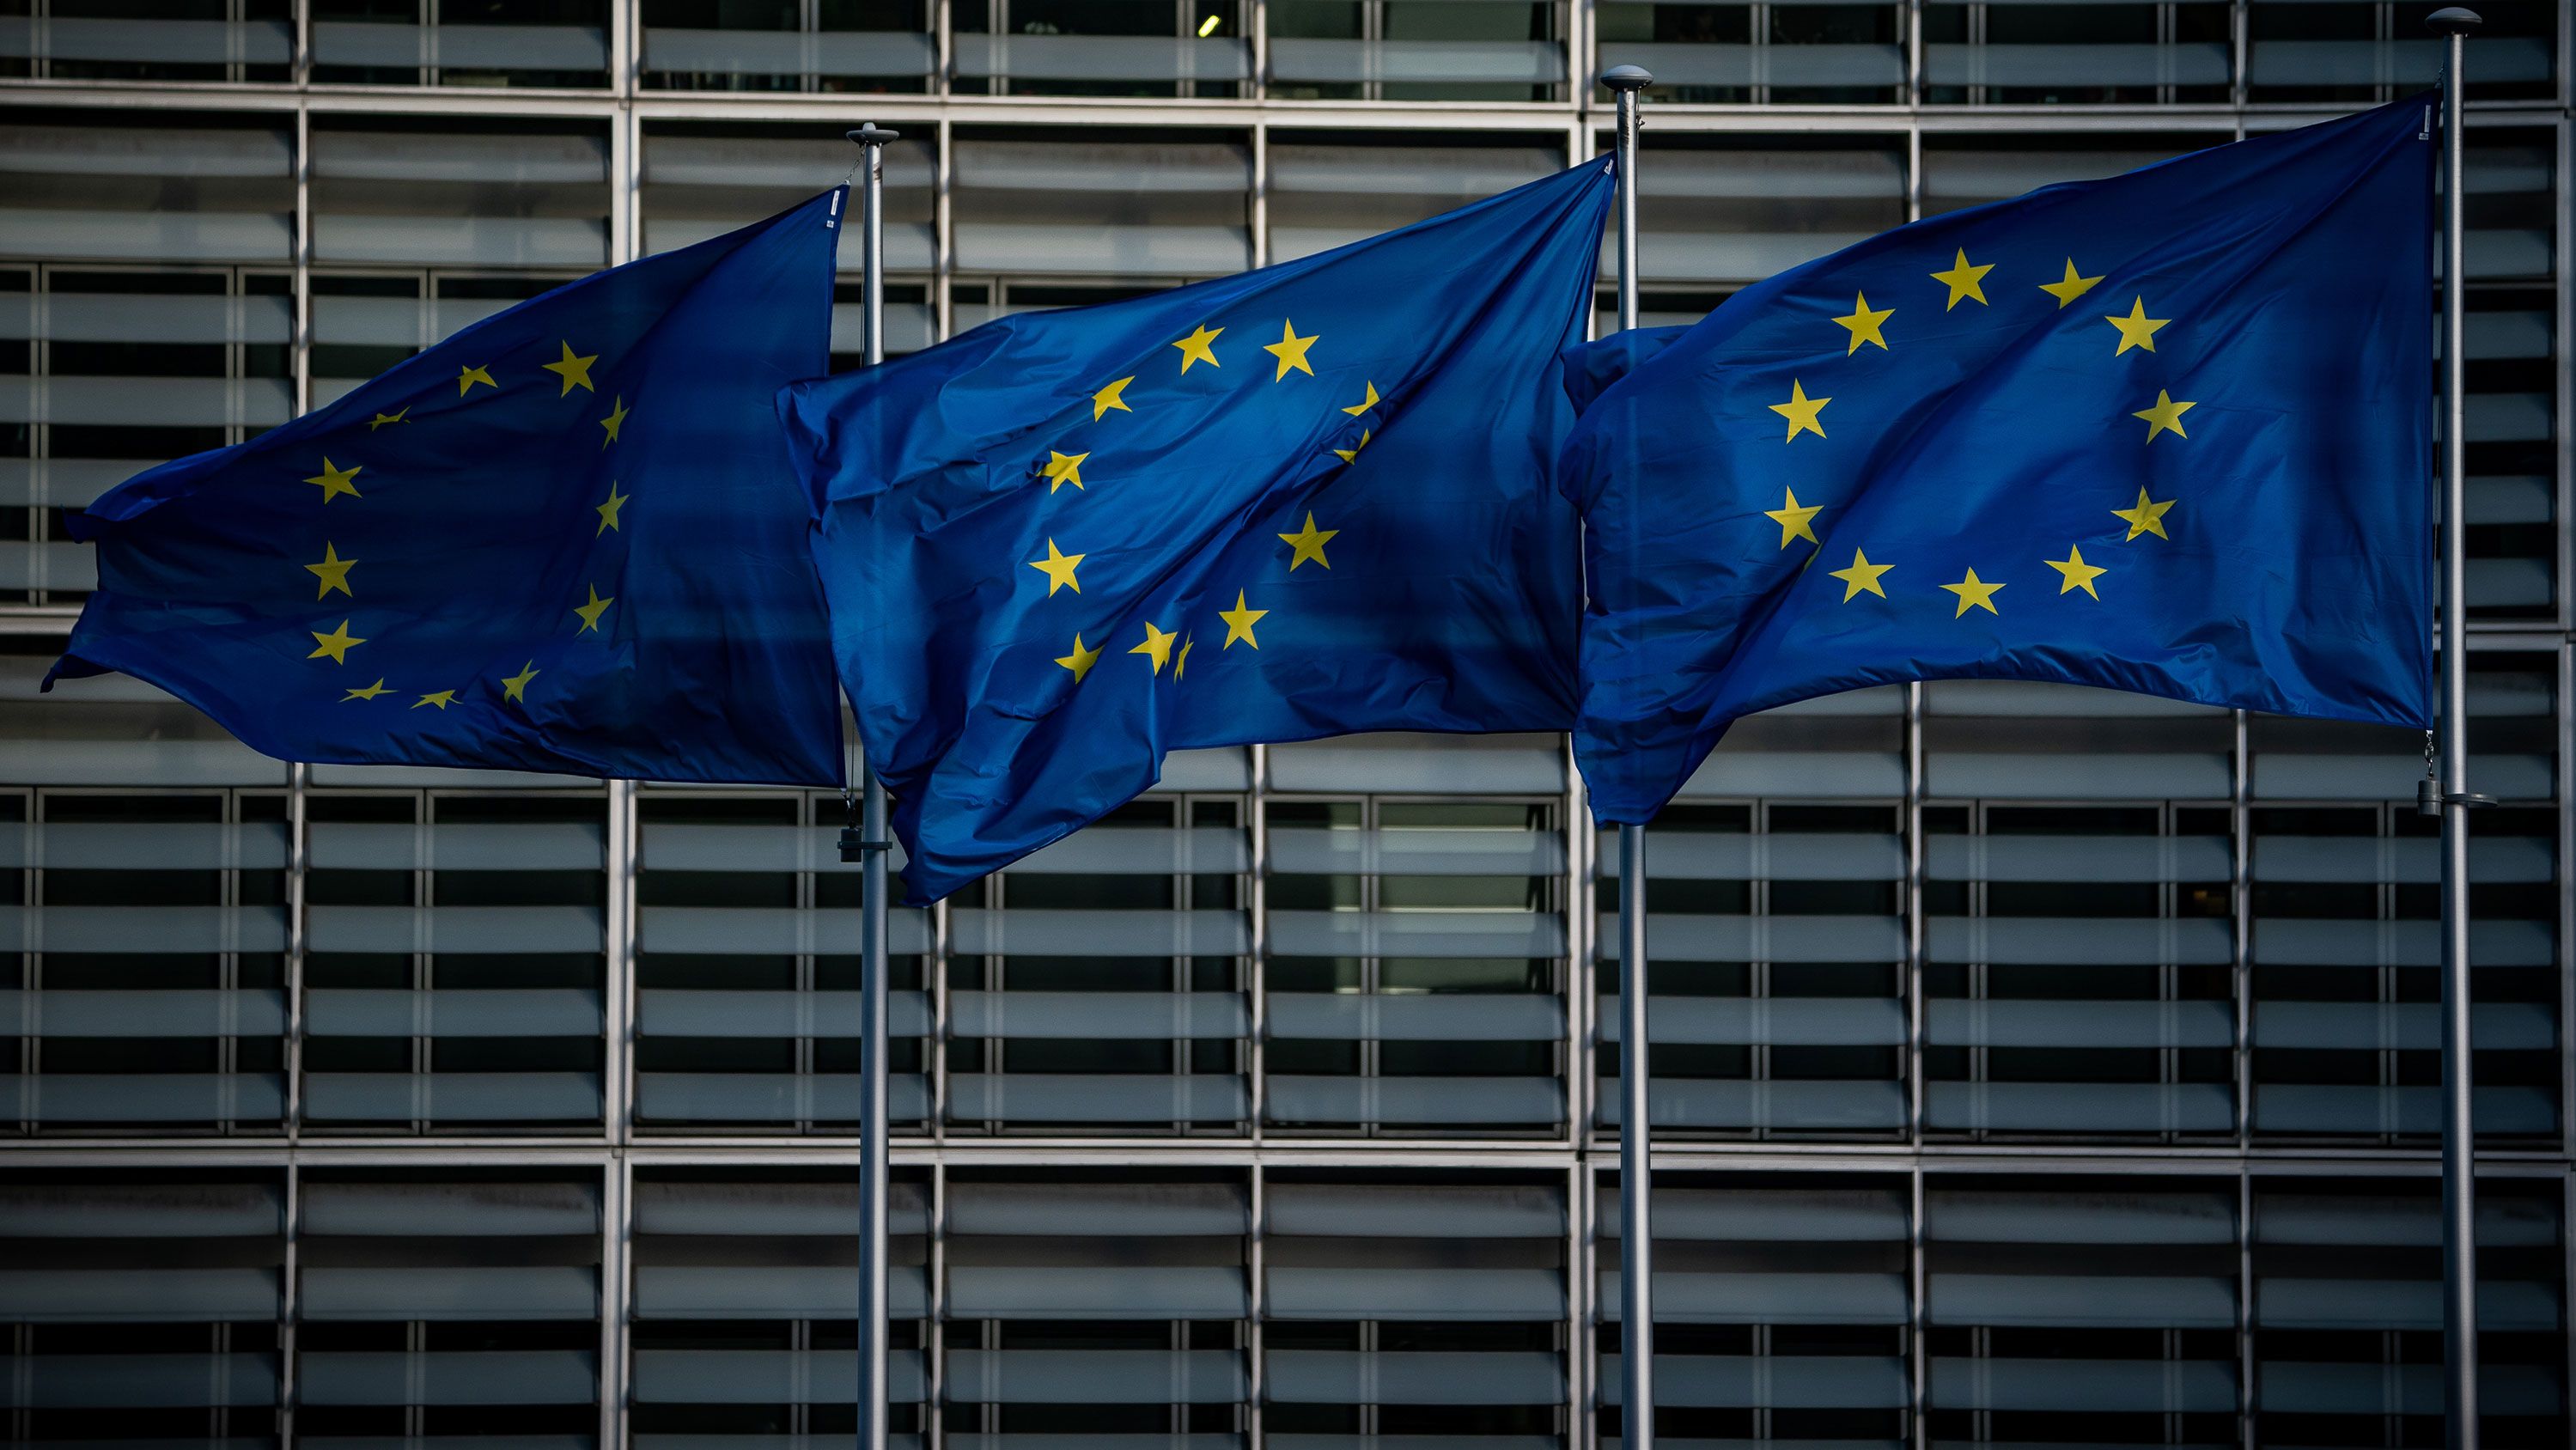 European Commission members met in Brussels Thursday to discuss disinformation within the EU.